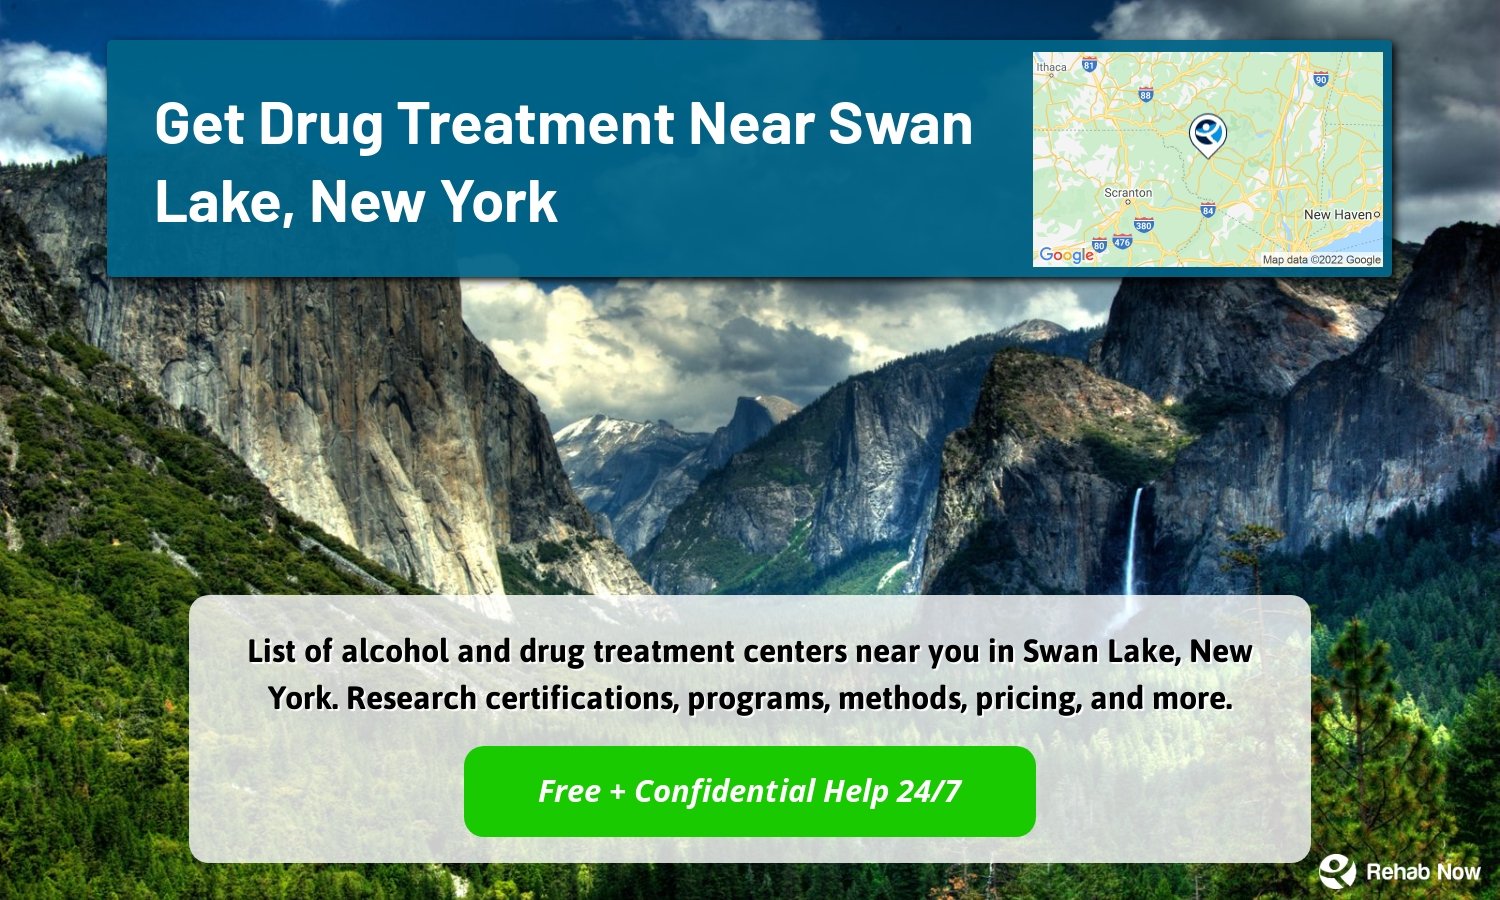 List of alcohol and drug treatment centers near you in Swan Lake, New York. Research certifications, programs, methods, pricing, and more.